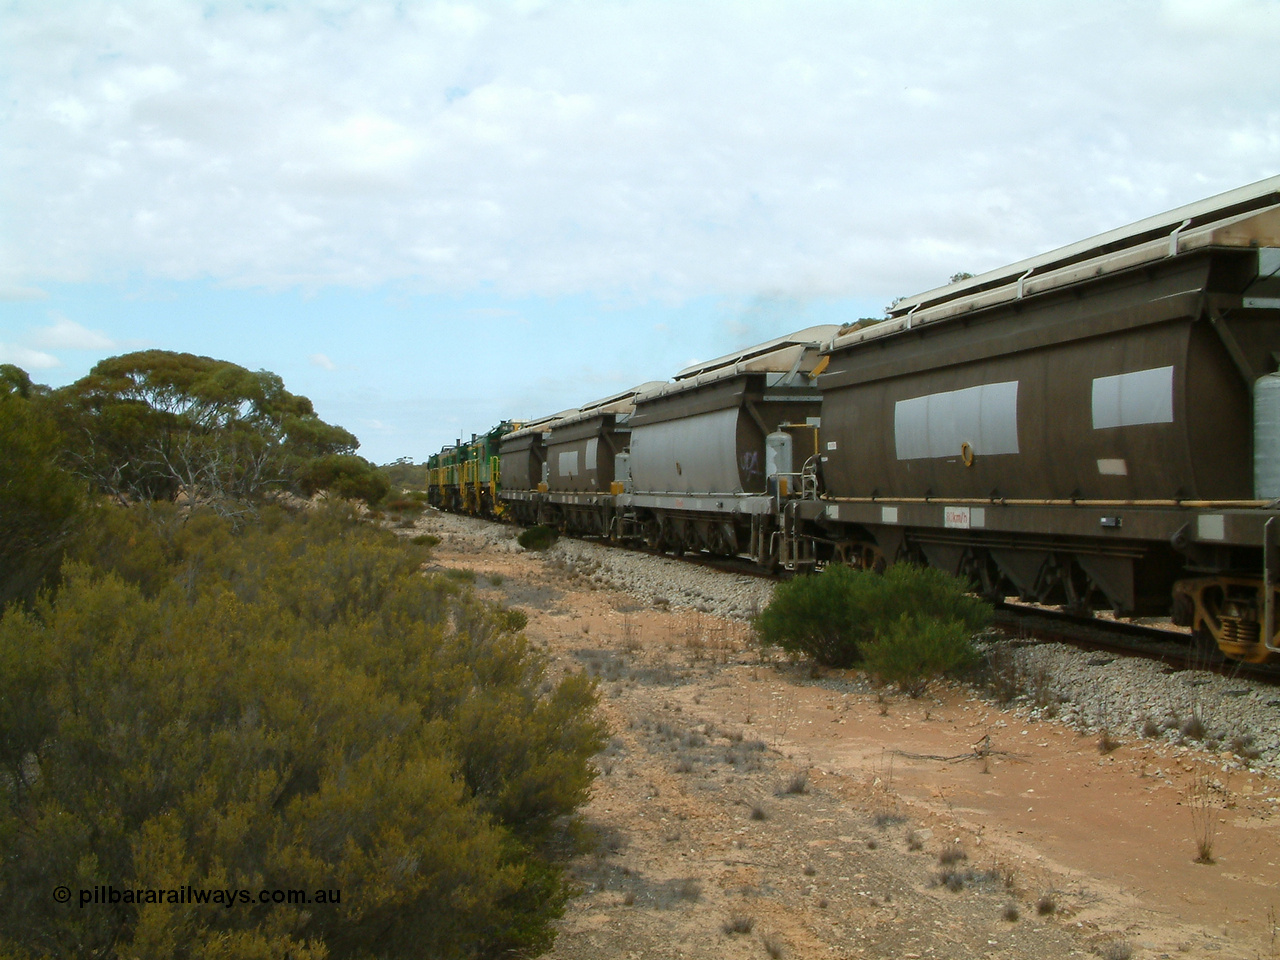 030409 121232
Kielpa, a few kilometres south of the former Konanda siding loaded grain train with 830 class unit 851 AE Goodwin ALCo model DL531 serial 84137, 851 has spent its entire operating career on the Eyre Peninsula, leads fellow 830 class 842 serial 84140 and a rebuilt unit DA 4, rebuilt from 830 class unit 839 by Port Augusta Workshops, retains original serial 83730 and model DL531 with the first twelve waggons behind the locos XNW type powers away from a crew change.
